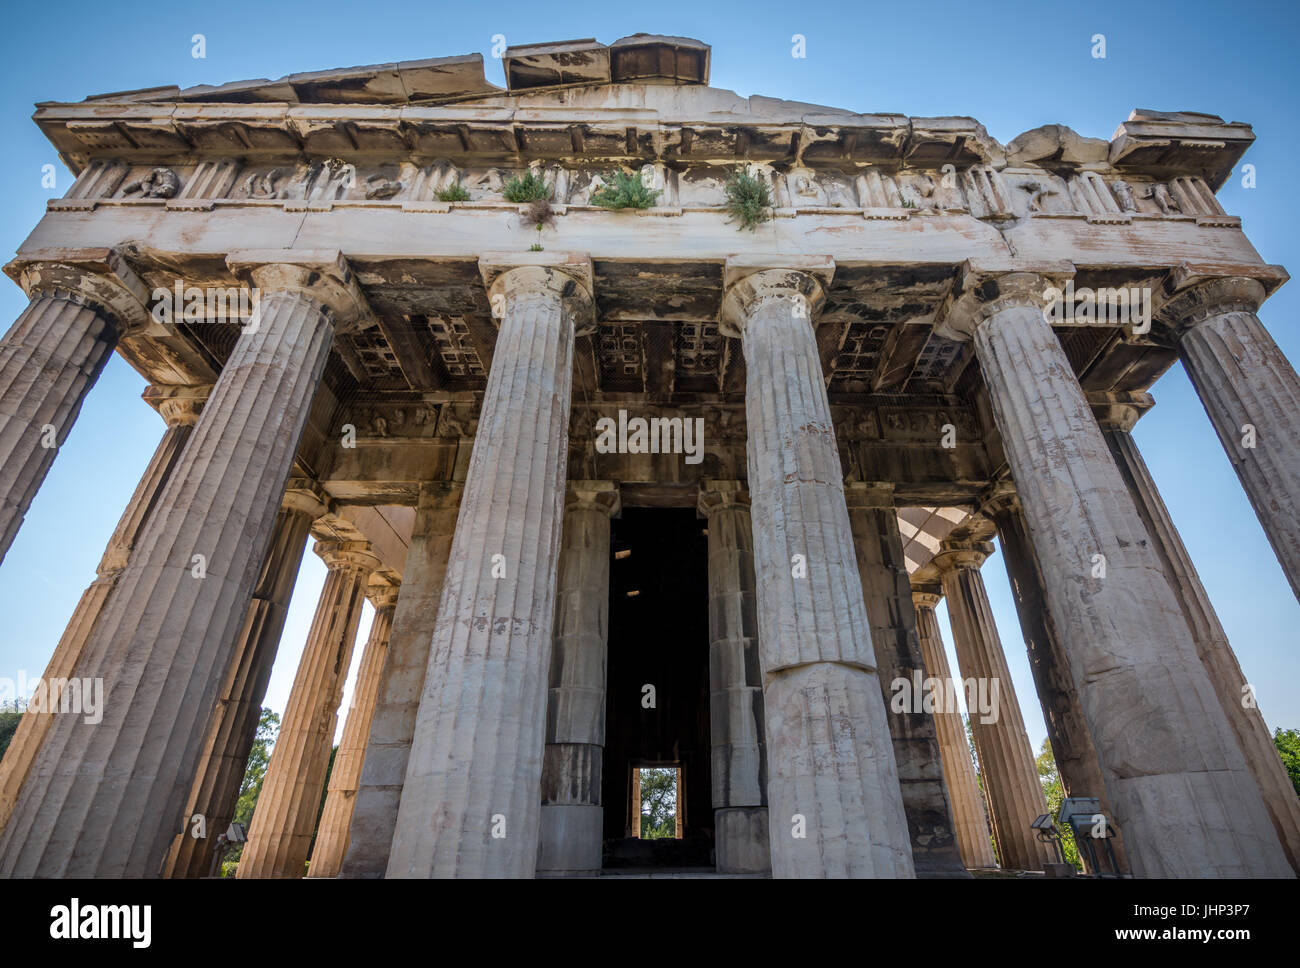 Ruins of the Temple of Hephaestus near the ancient Agora (Forum) of Athens Stock Photo